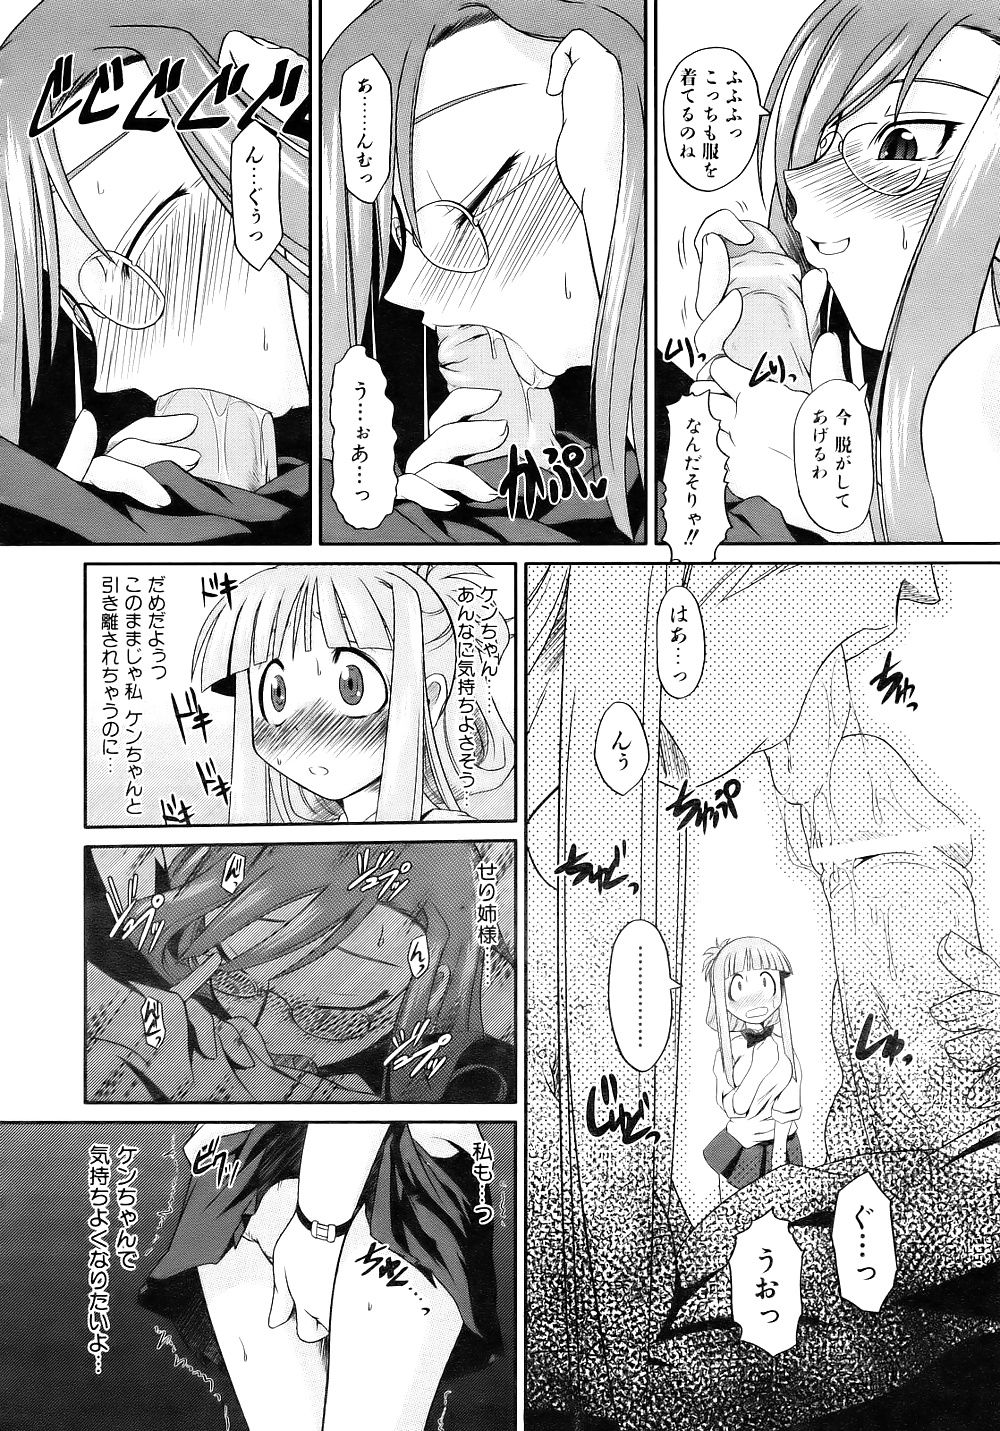 69 - sixty nine - giving and receiving - hentai 16 #38533970